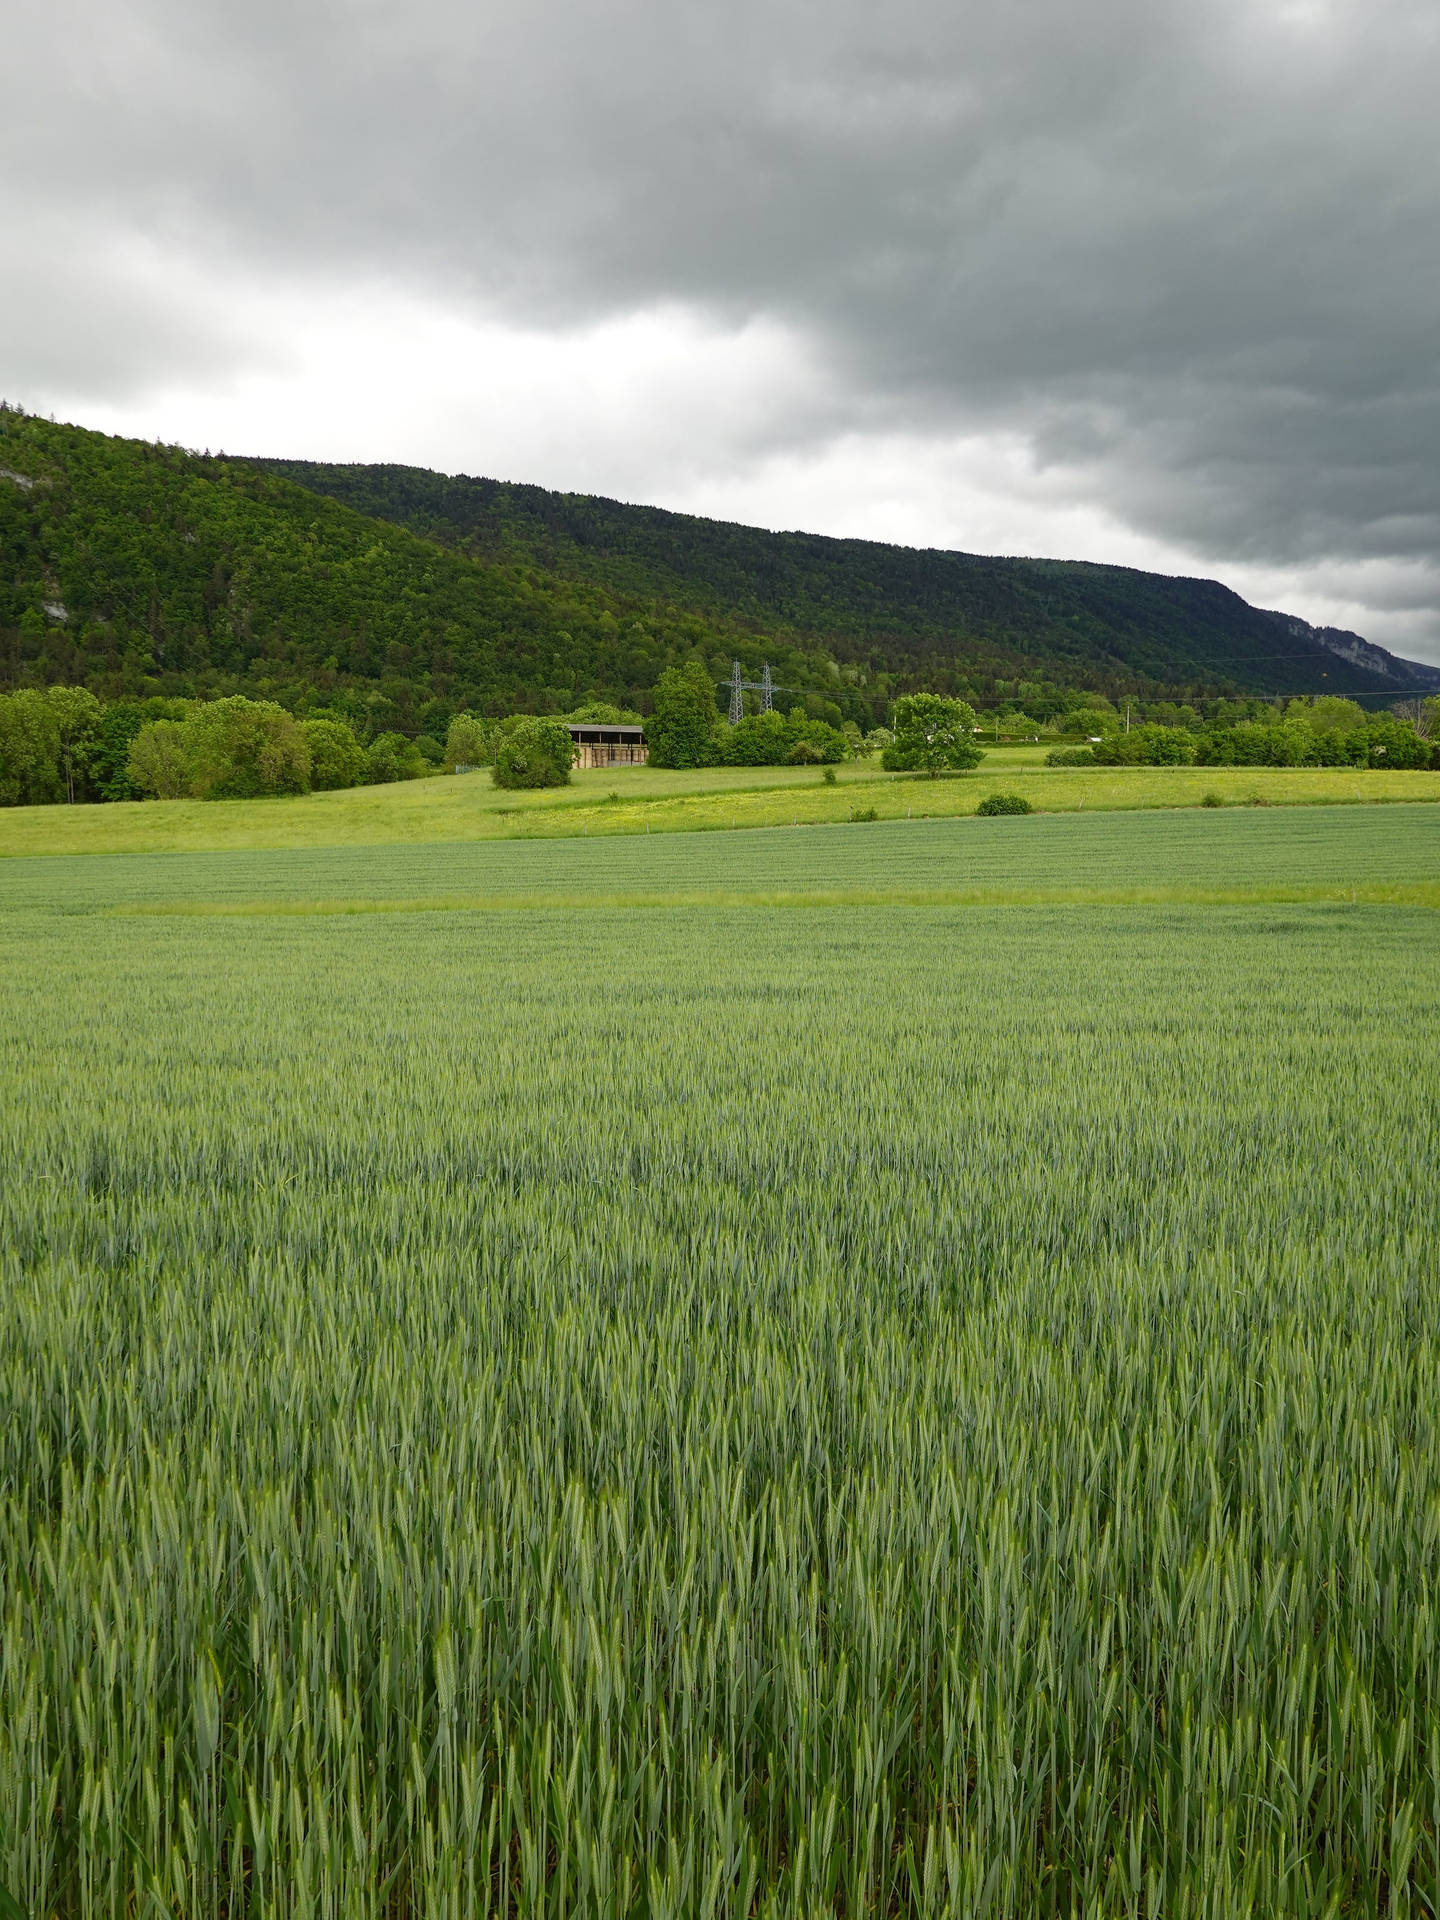 Green Hill And Wheat Barley Field Background